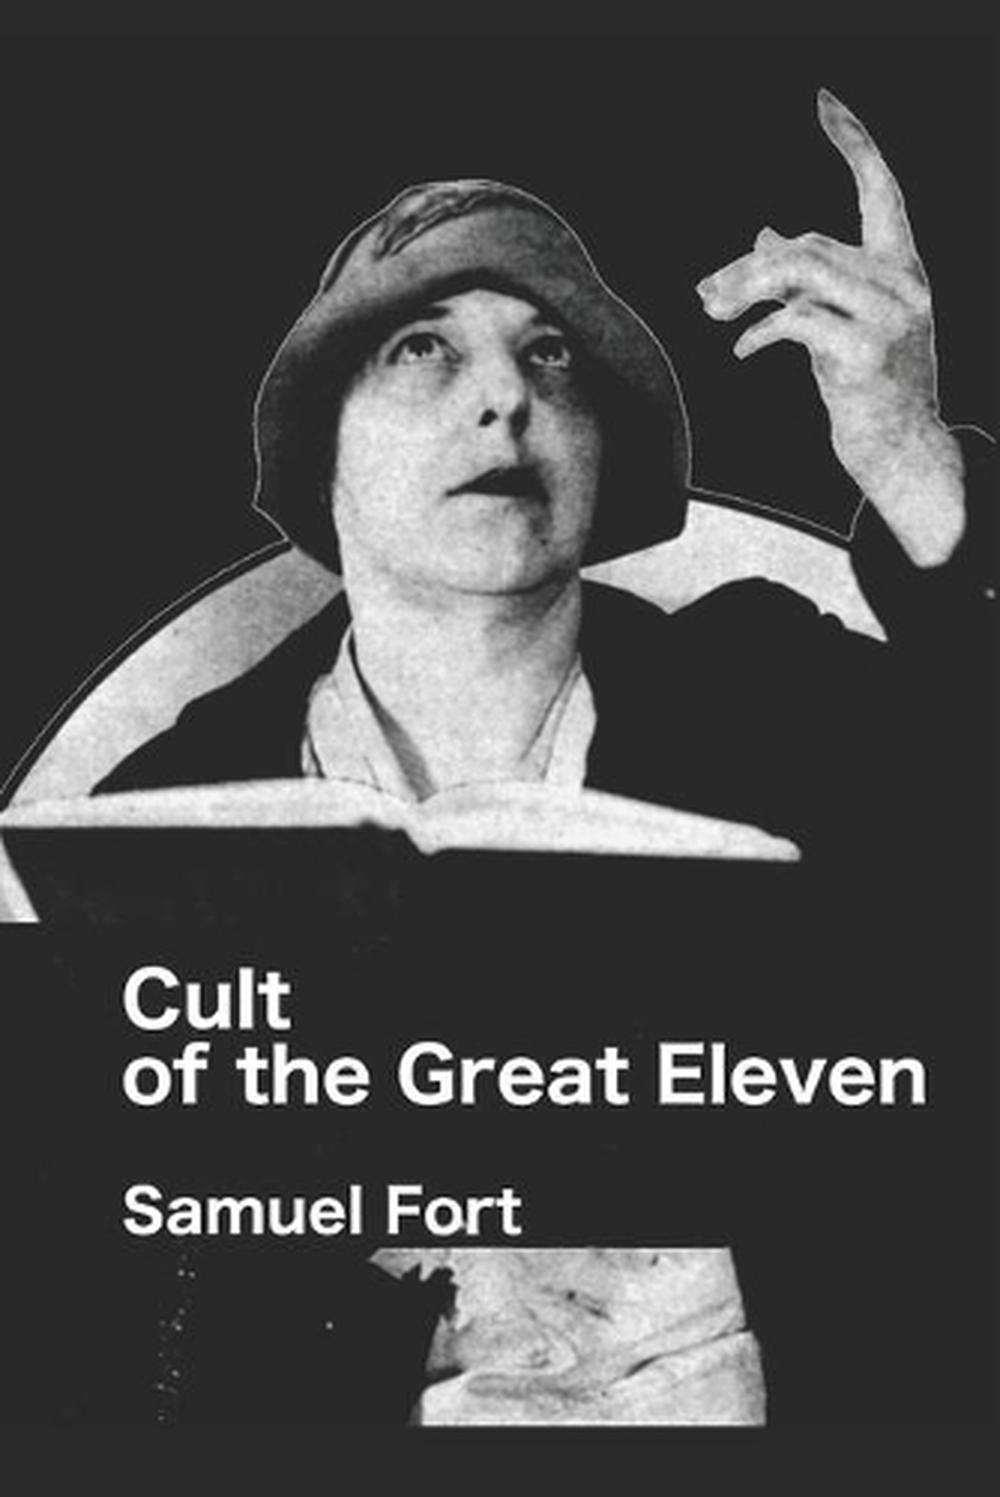 Cult of the Great Eleven by Samuel Fort